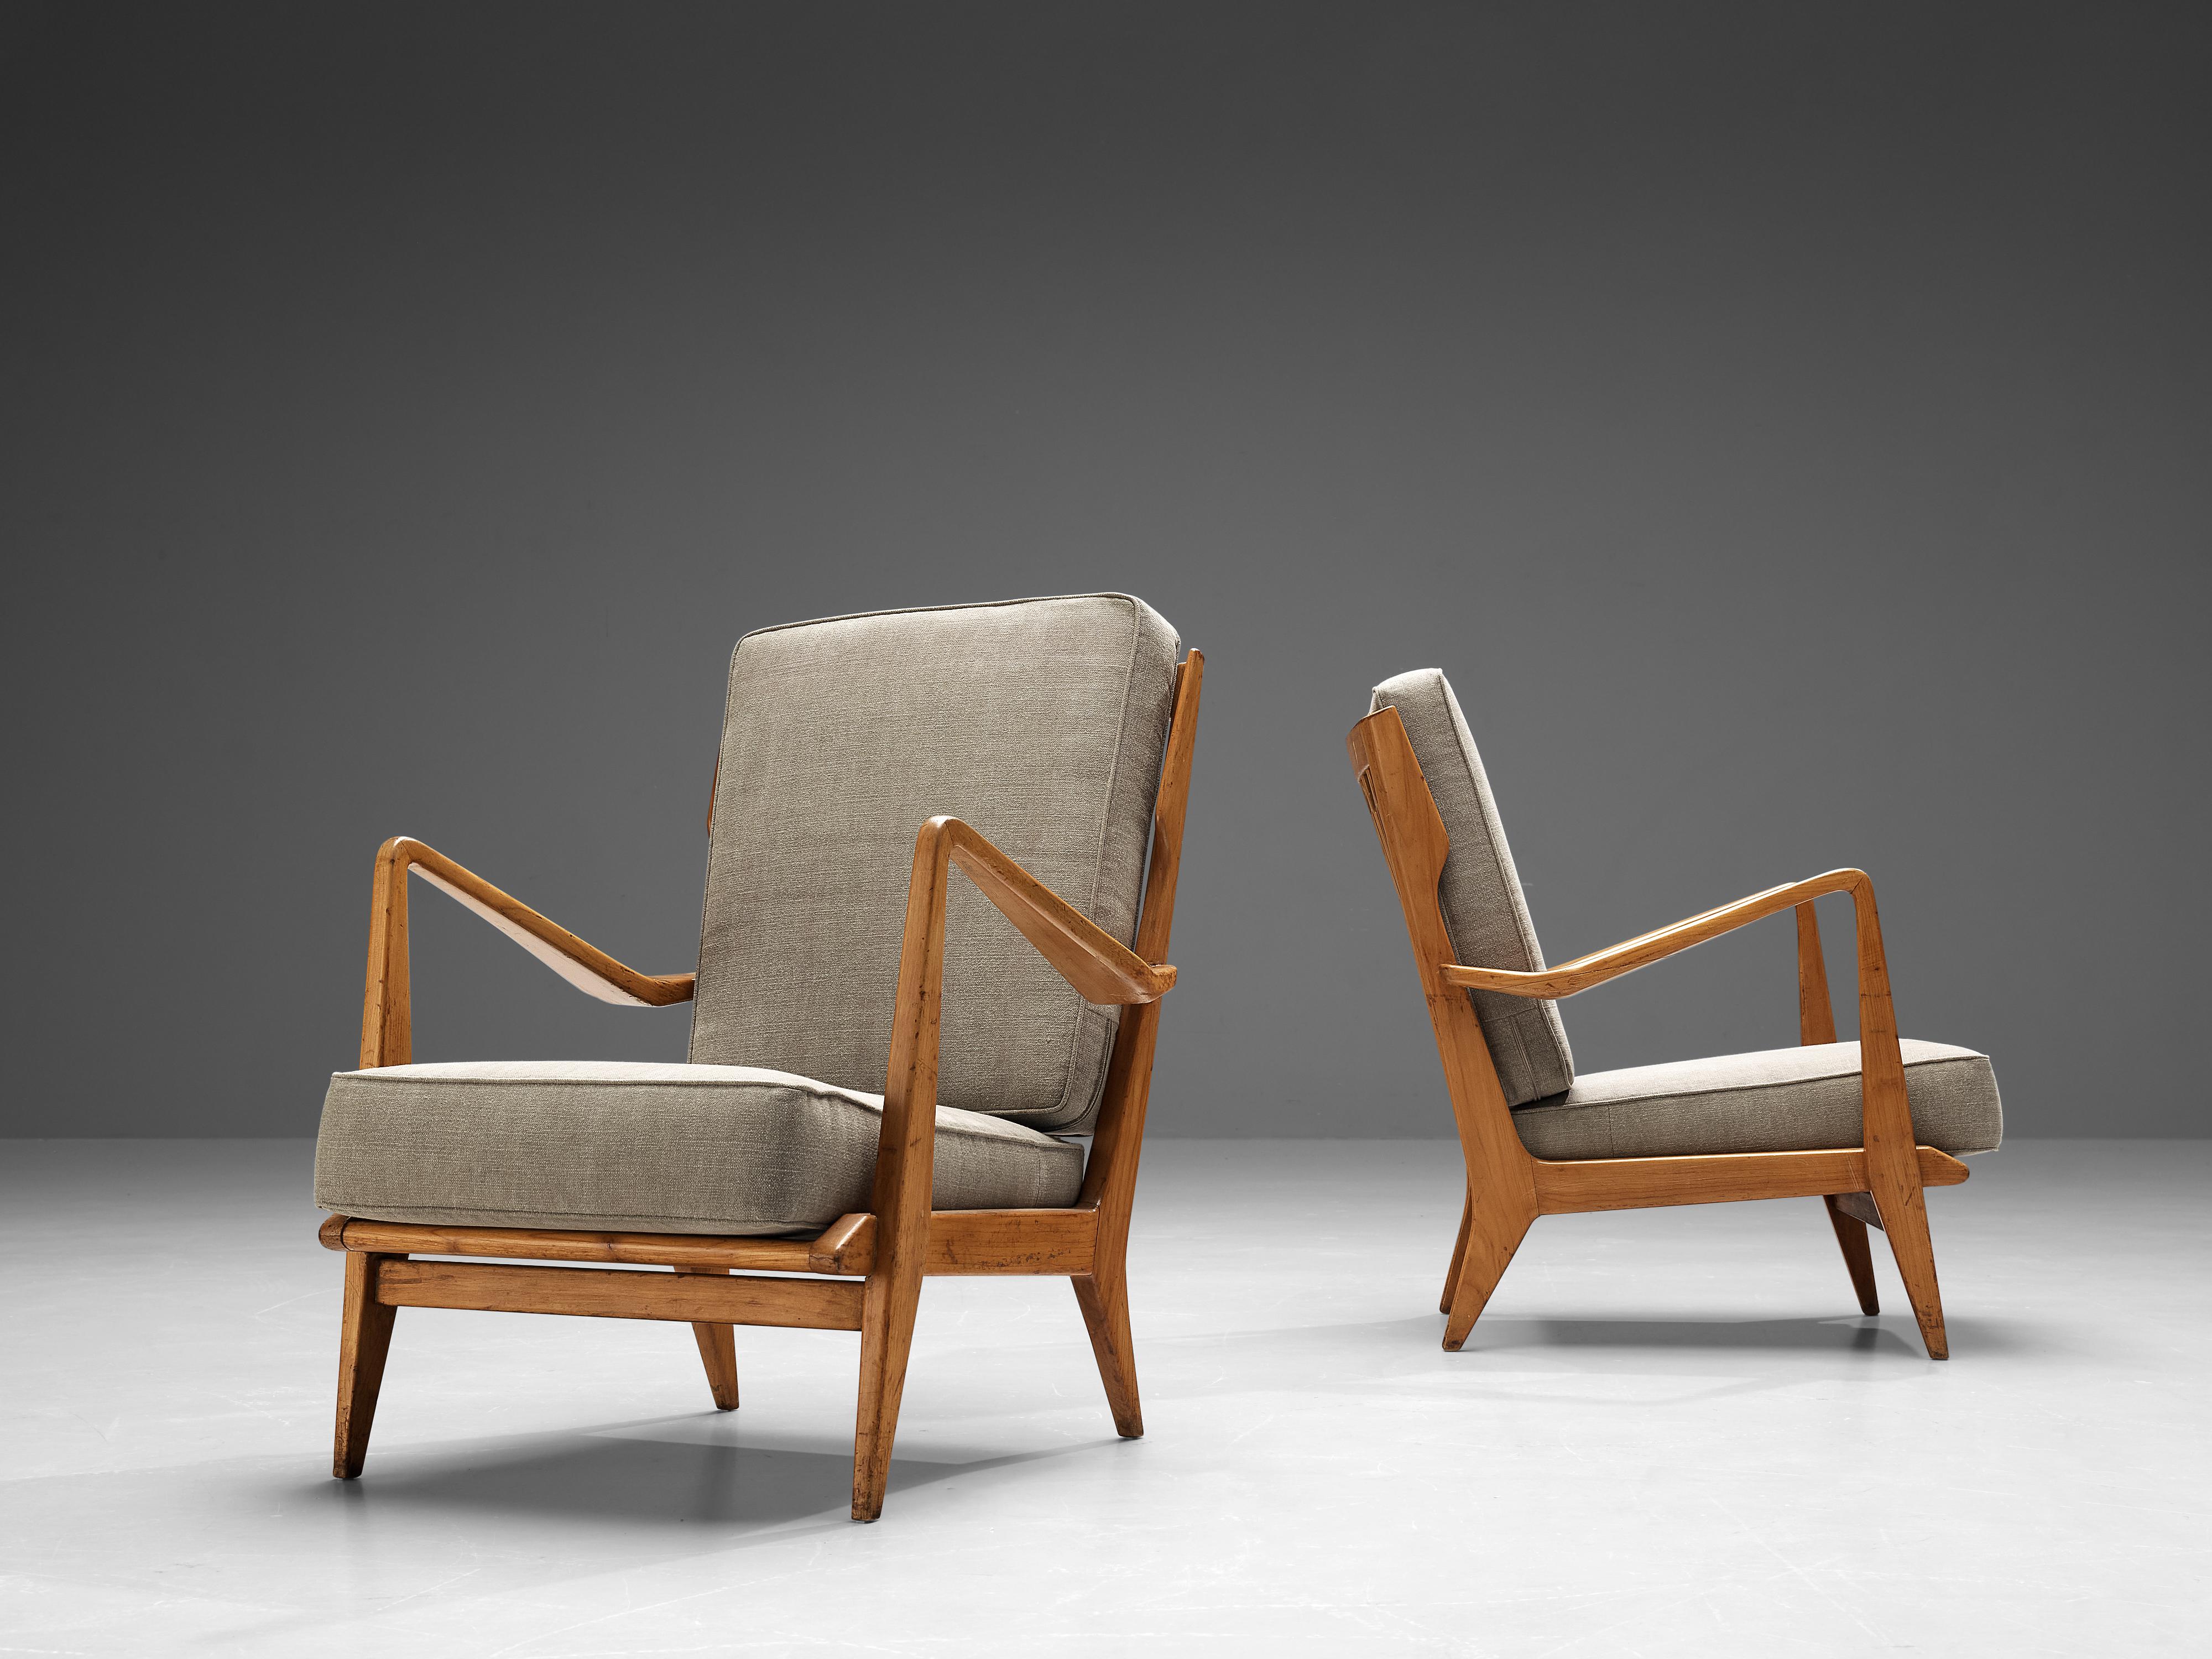 Gio Ponti for Cassina, pair of armchairs, model '516', cherry, grey fabric, Cassina, Italy, 1955.

This pair of armchairs is designed by Gio Ponti and manufactured by Cassina. The design is characterized by a few distinct features that stand out.